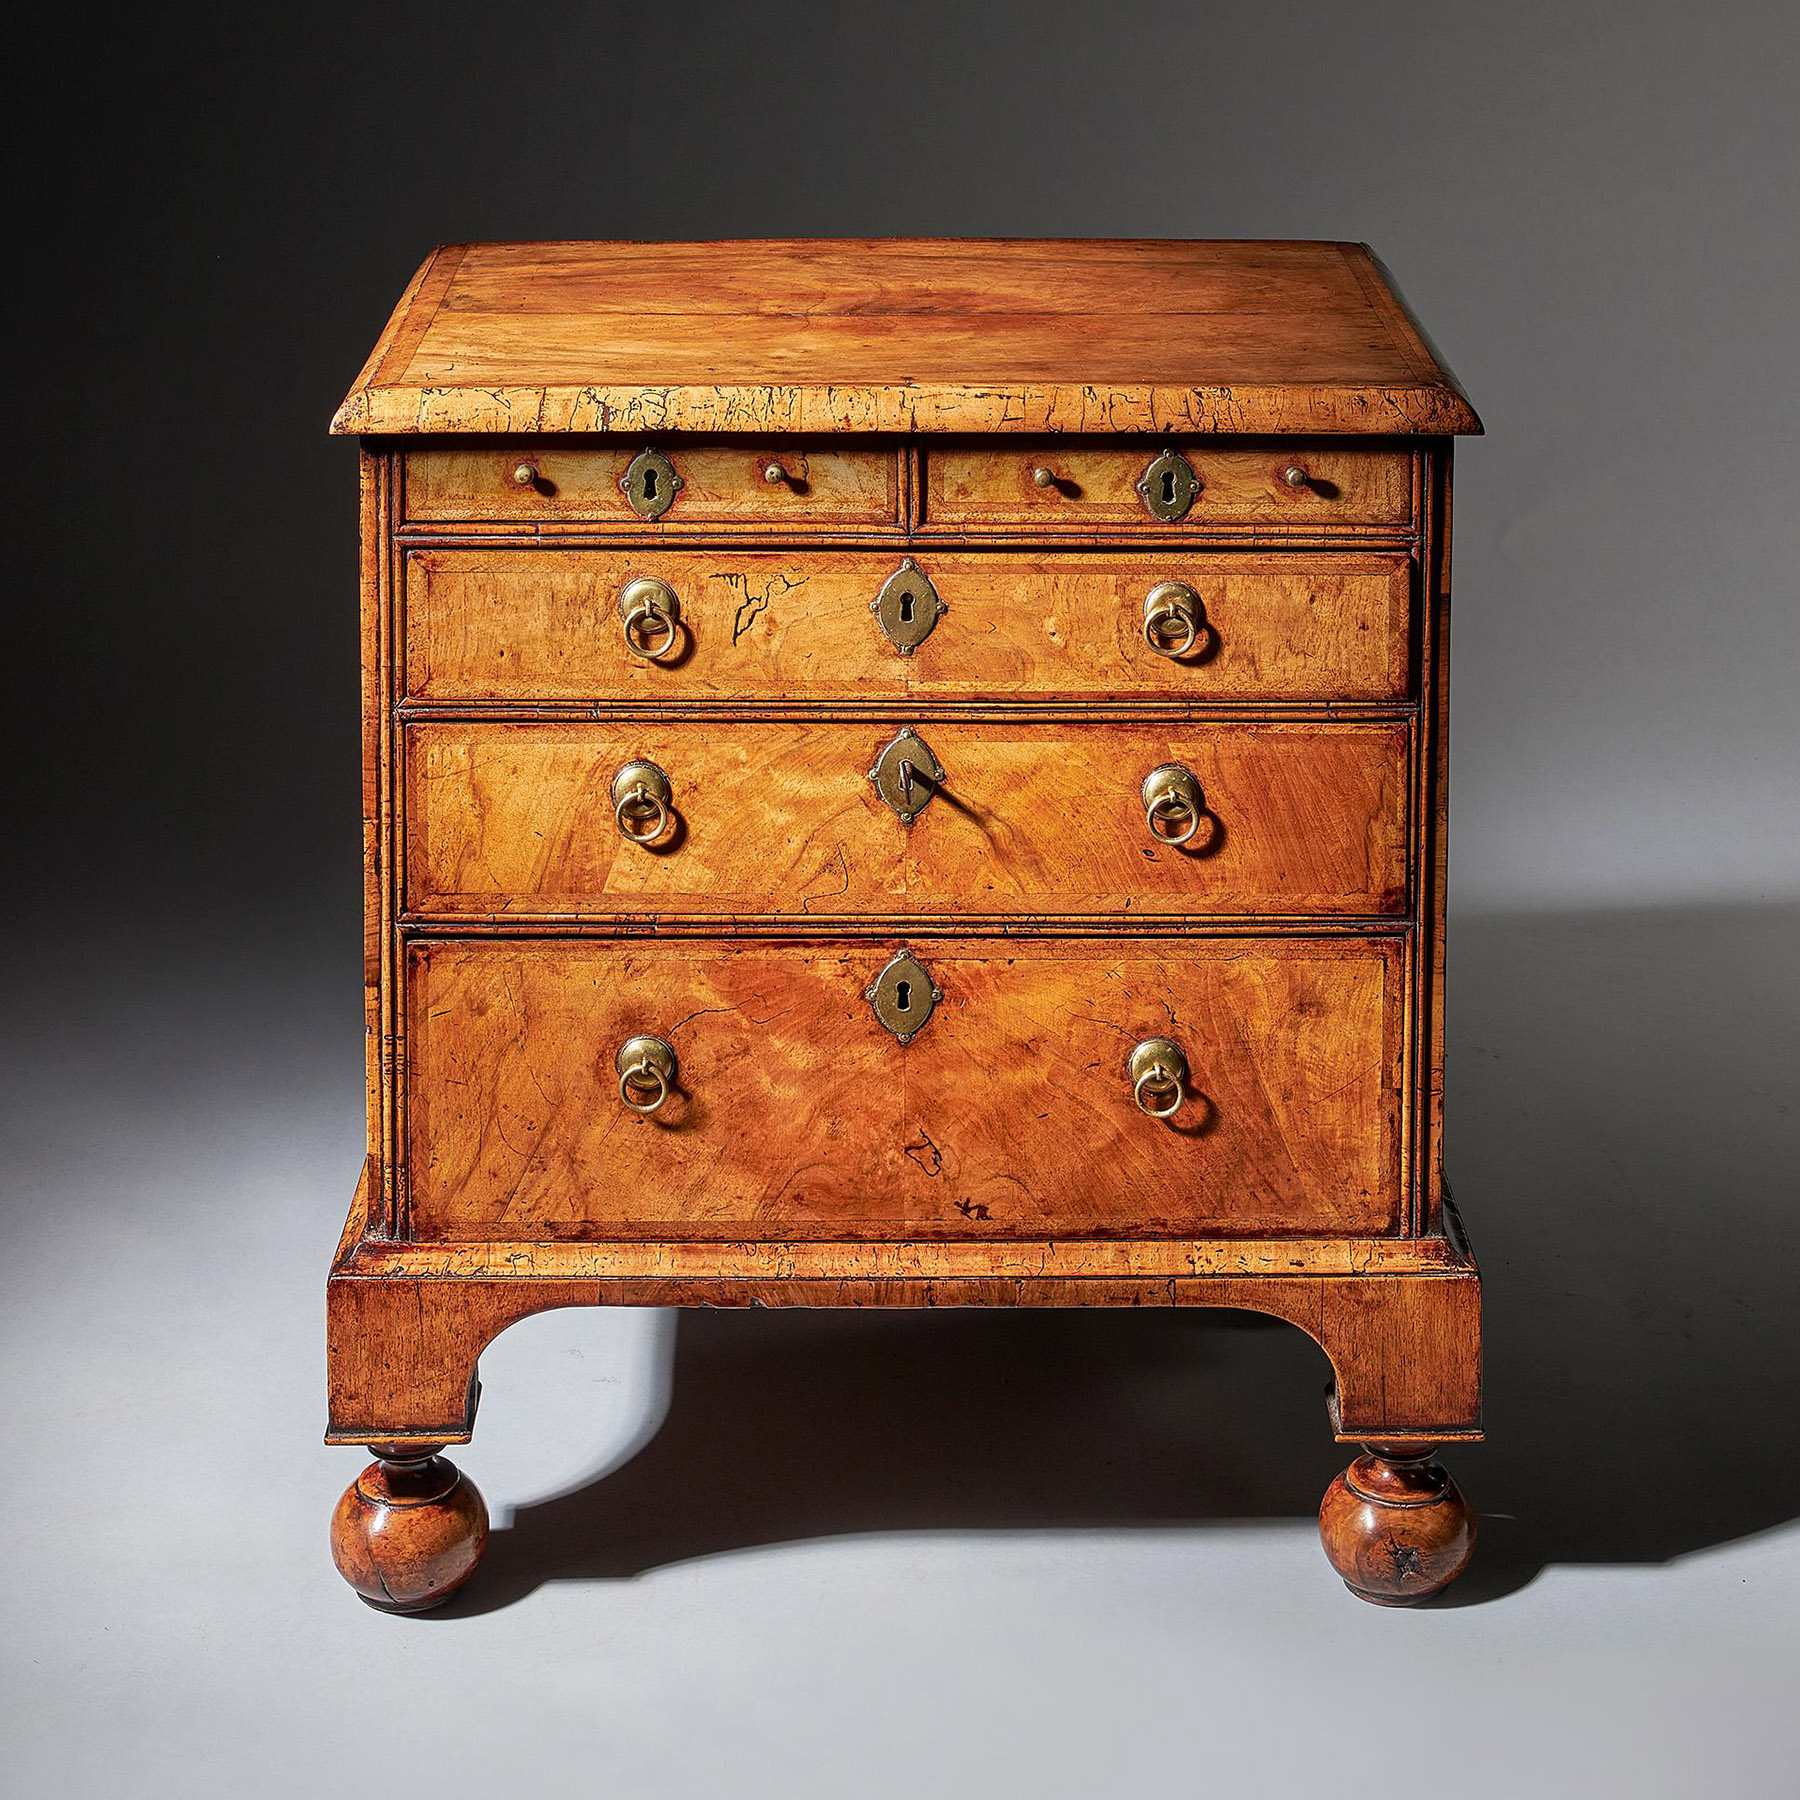 An extremely rare George I walnut chest of small proportions on ball and bracket 3